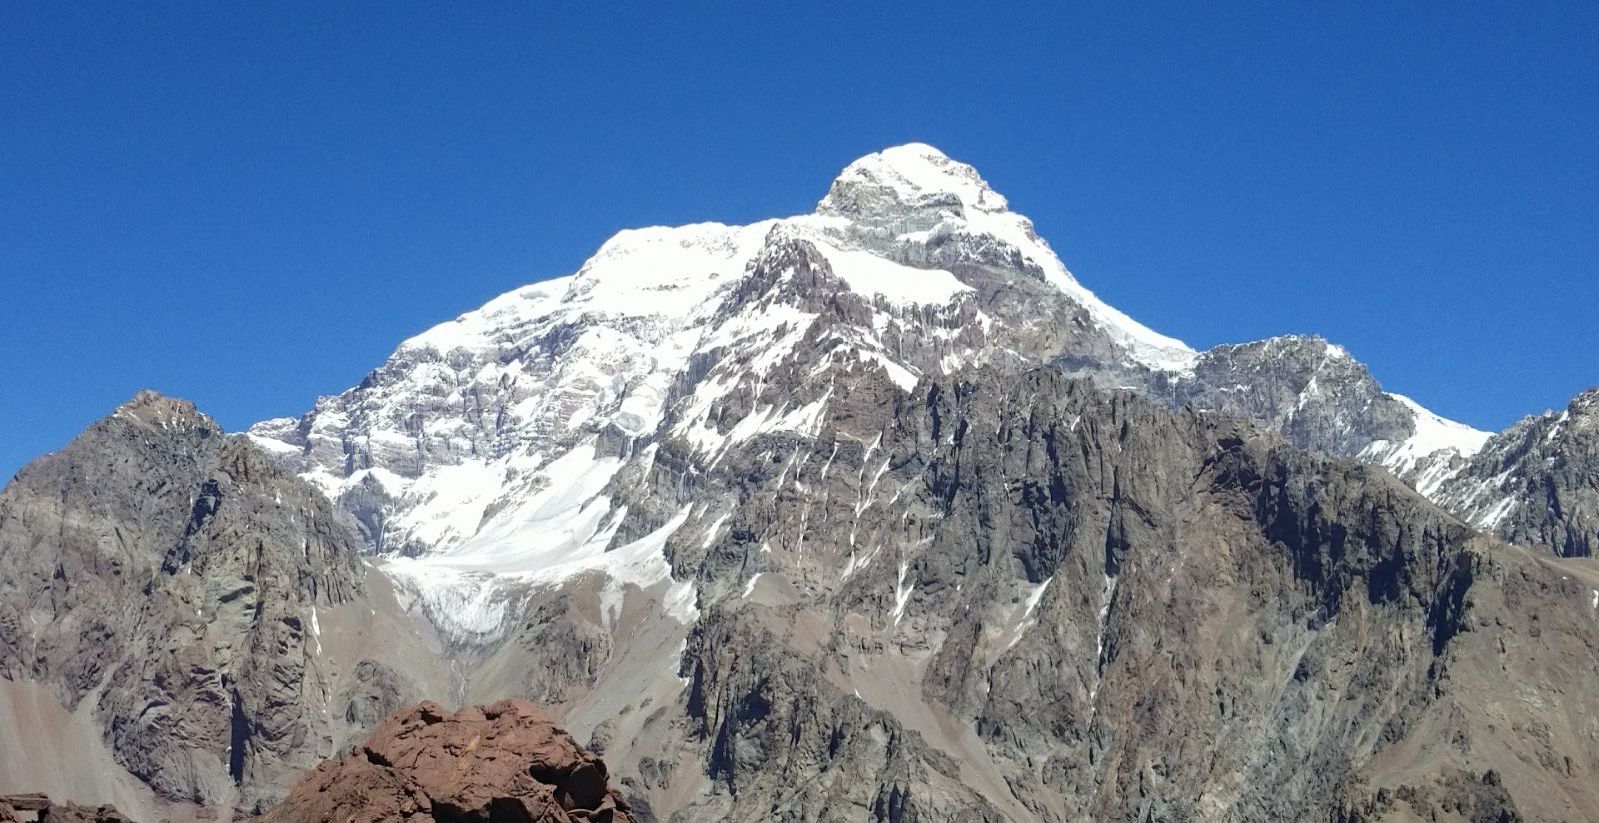 A view of Aconcagua, the tallest mountain in South America.